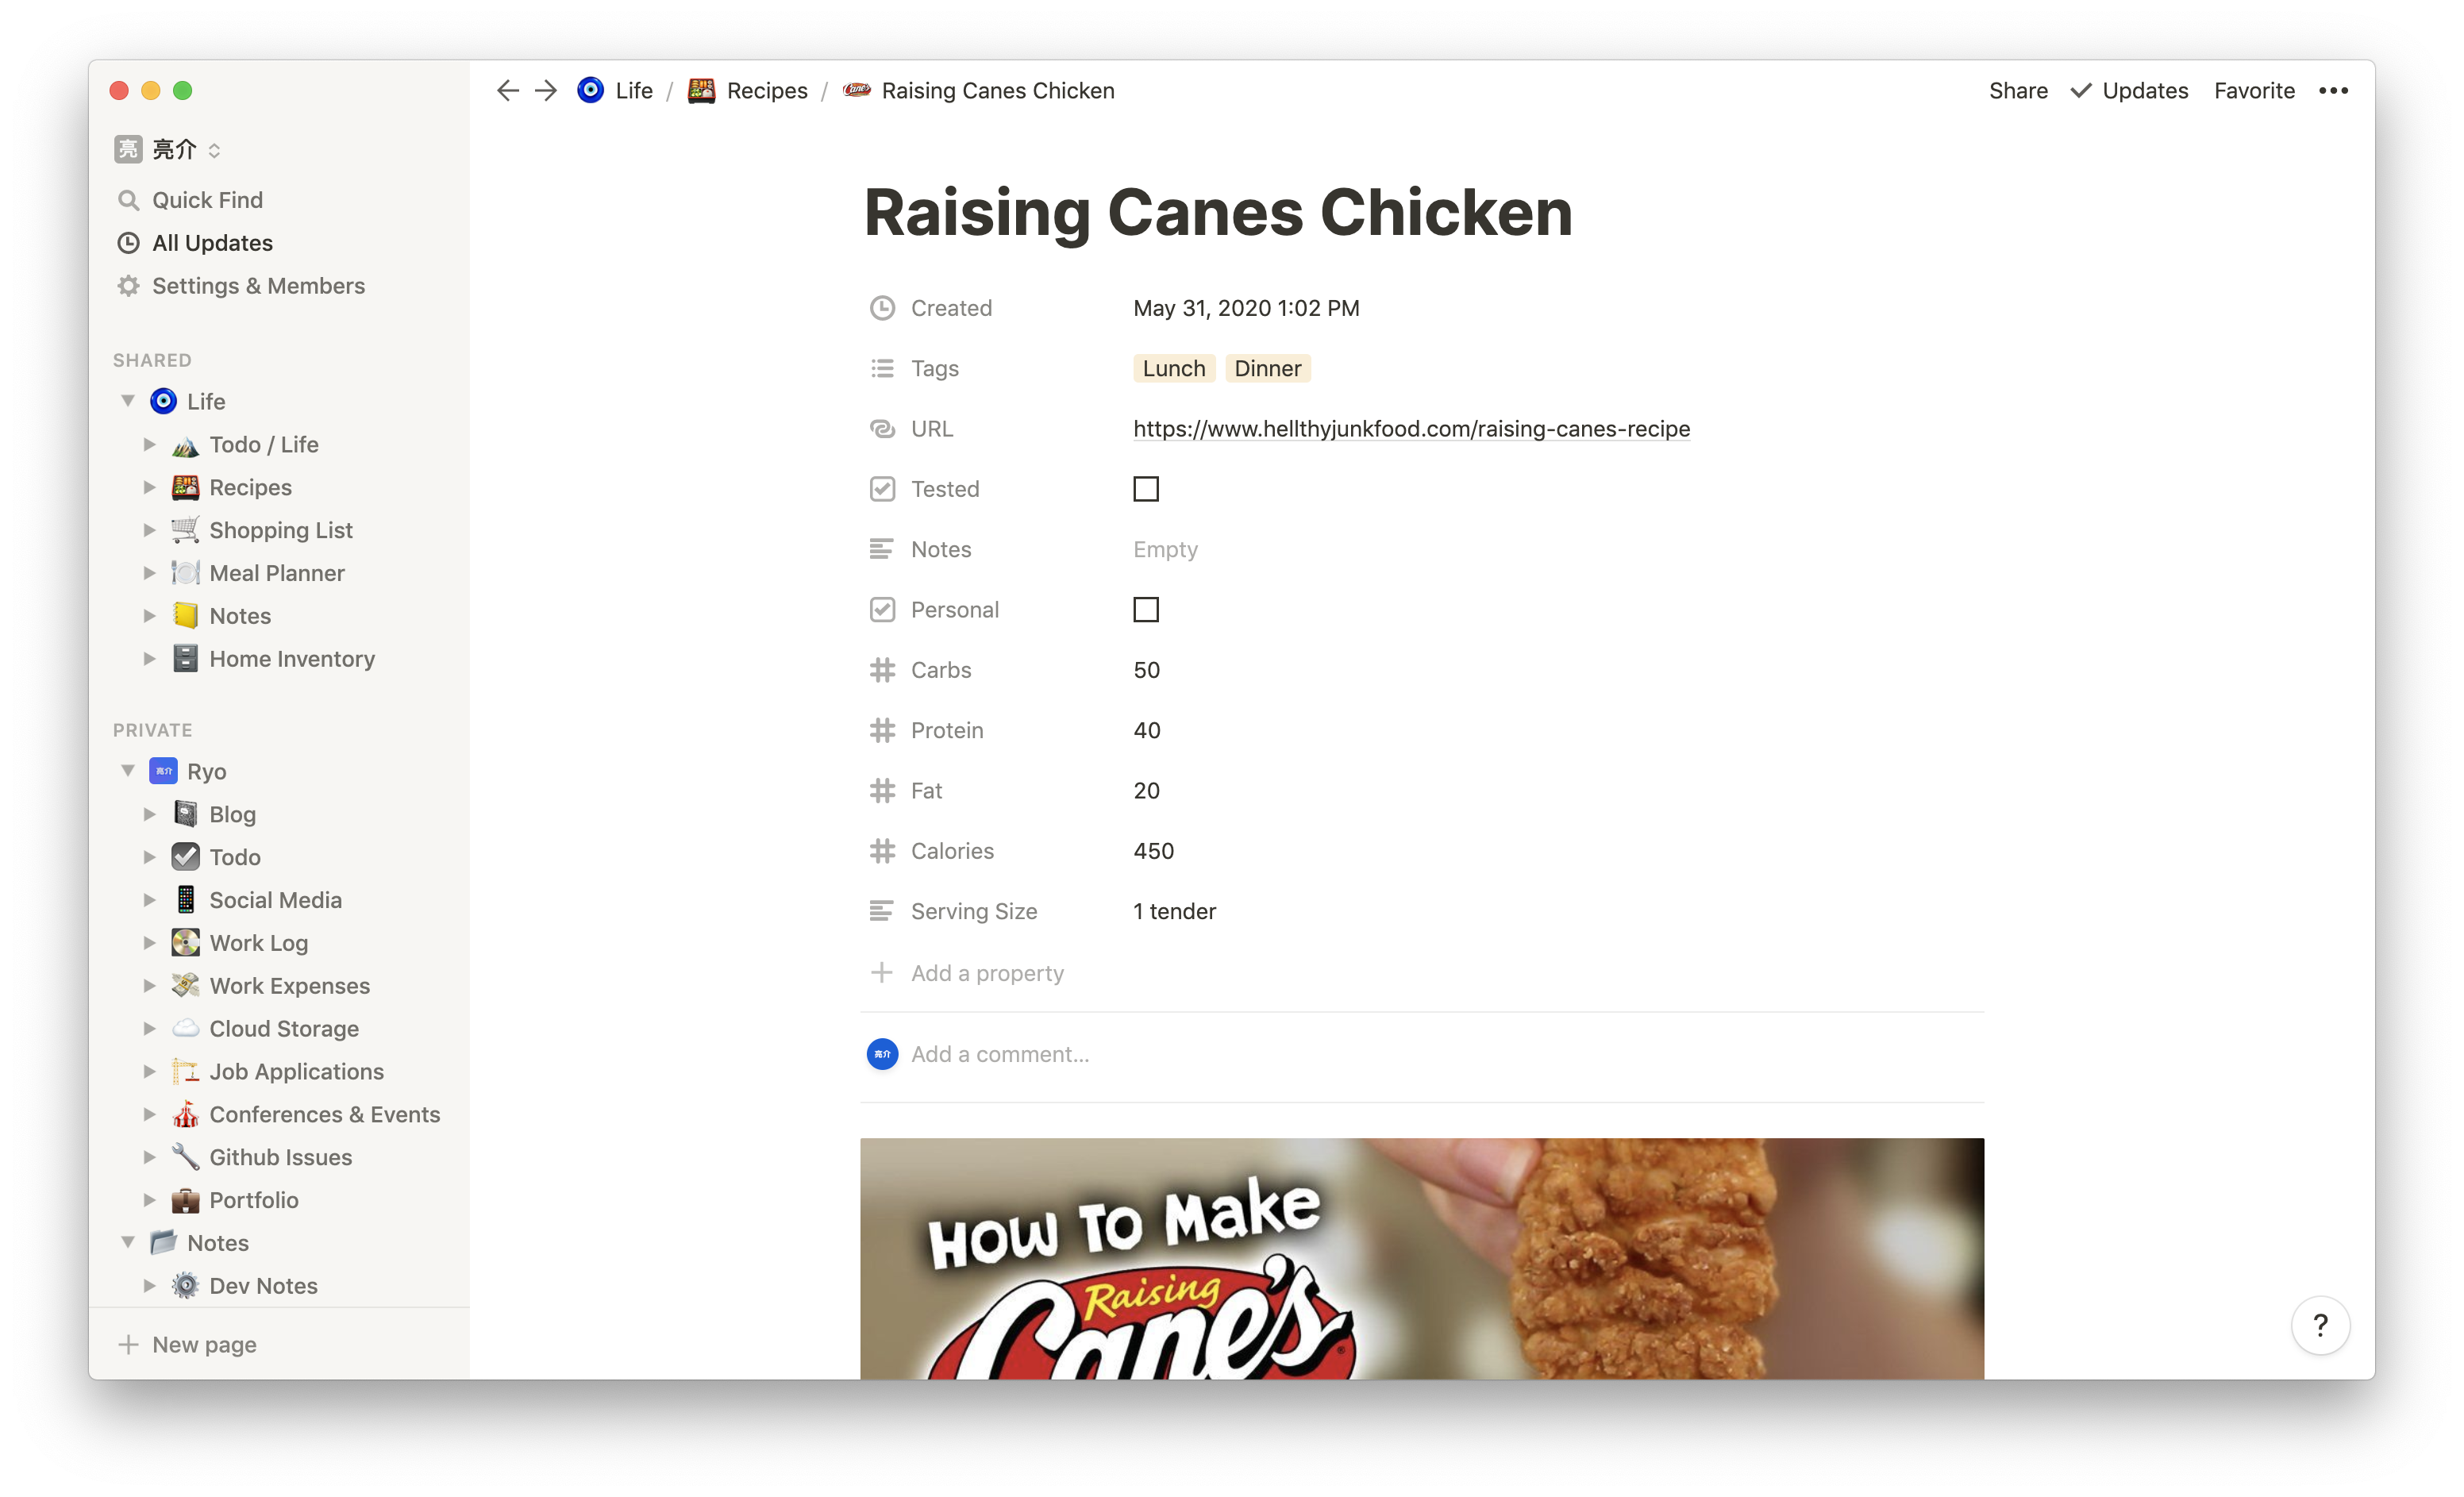 Screenshot of the Notion app on a recipe page (Raising Canes chicken specifically) showing page properties like recipe URL or macros (fat/protein/etc)